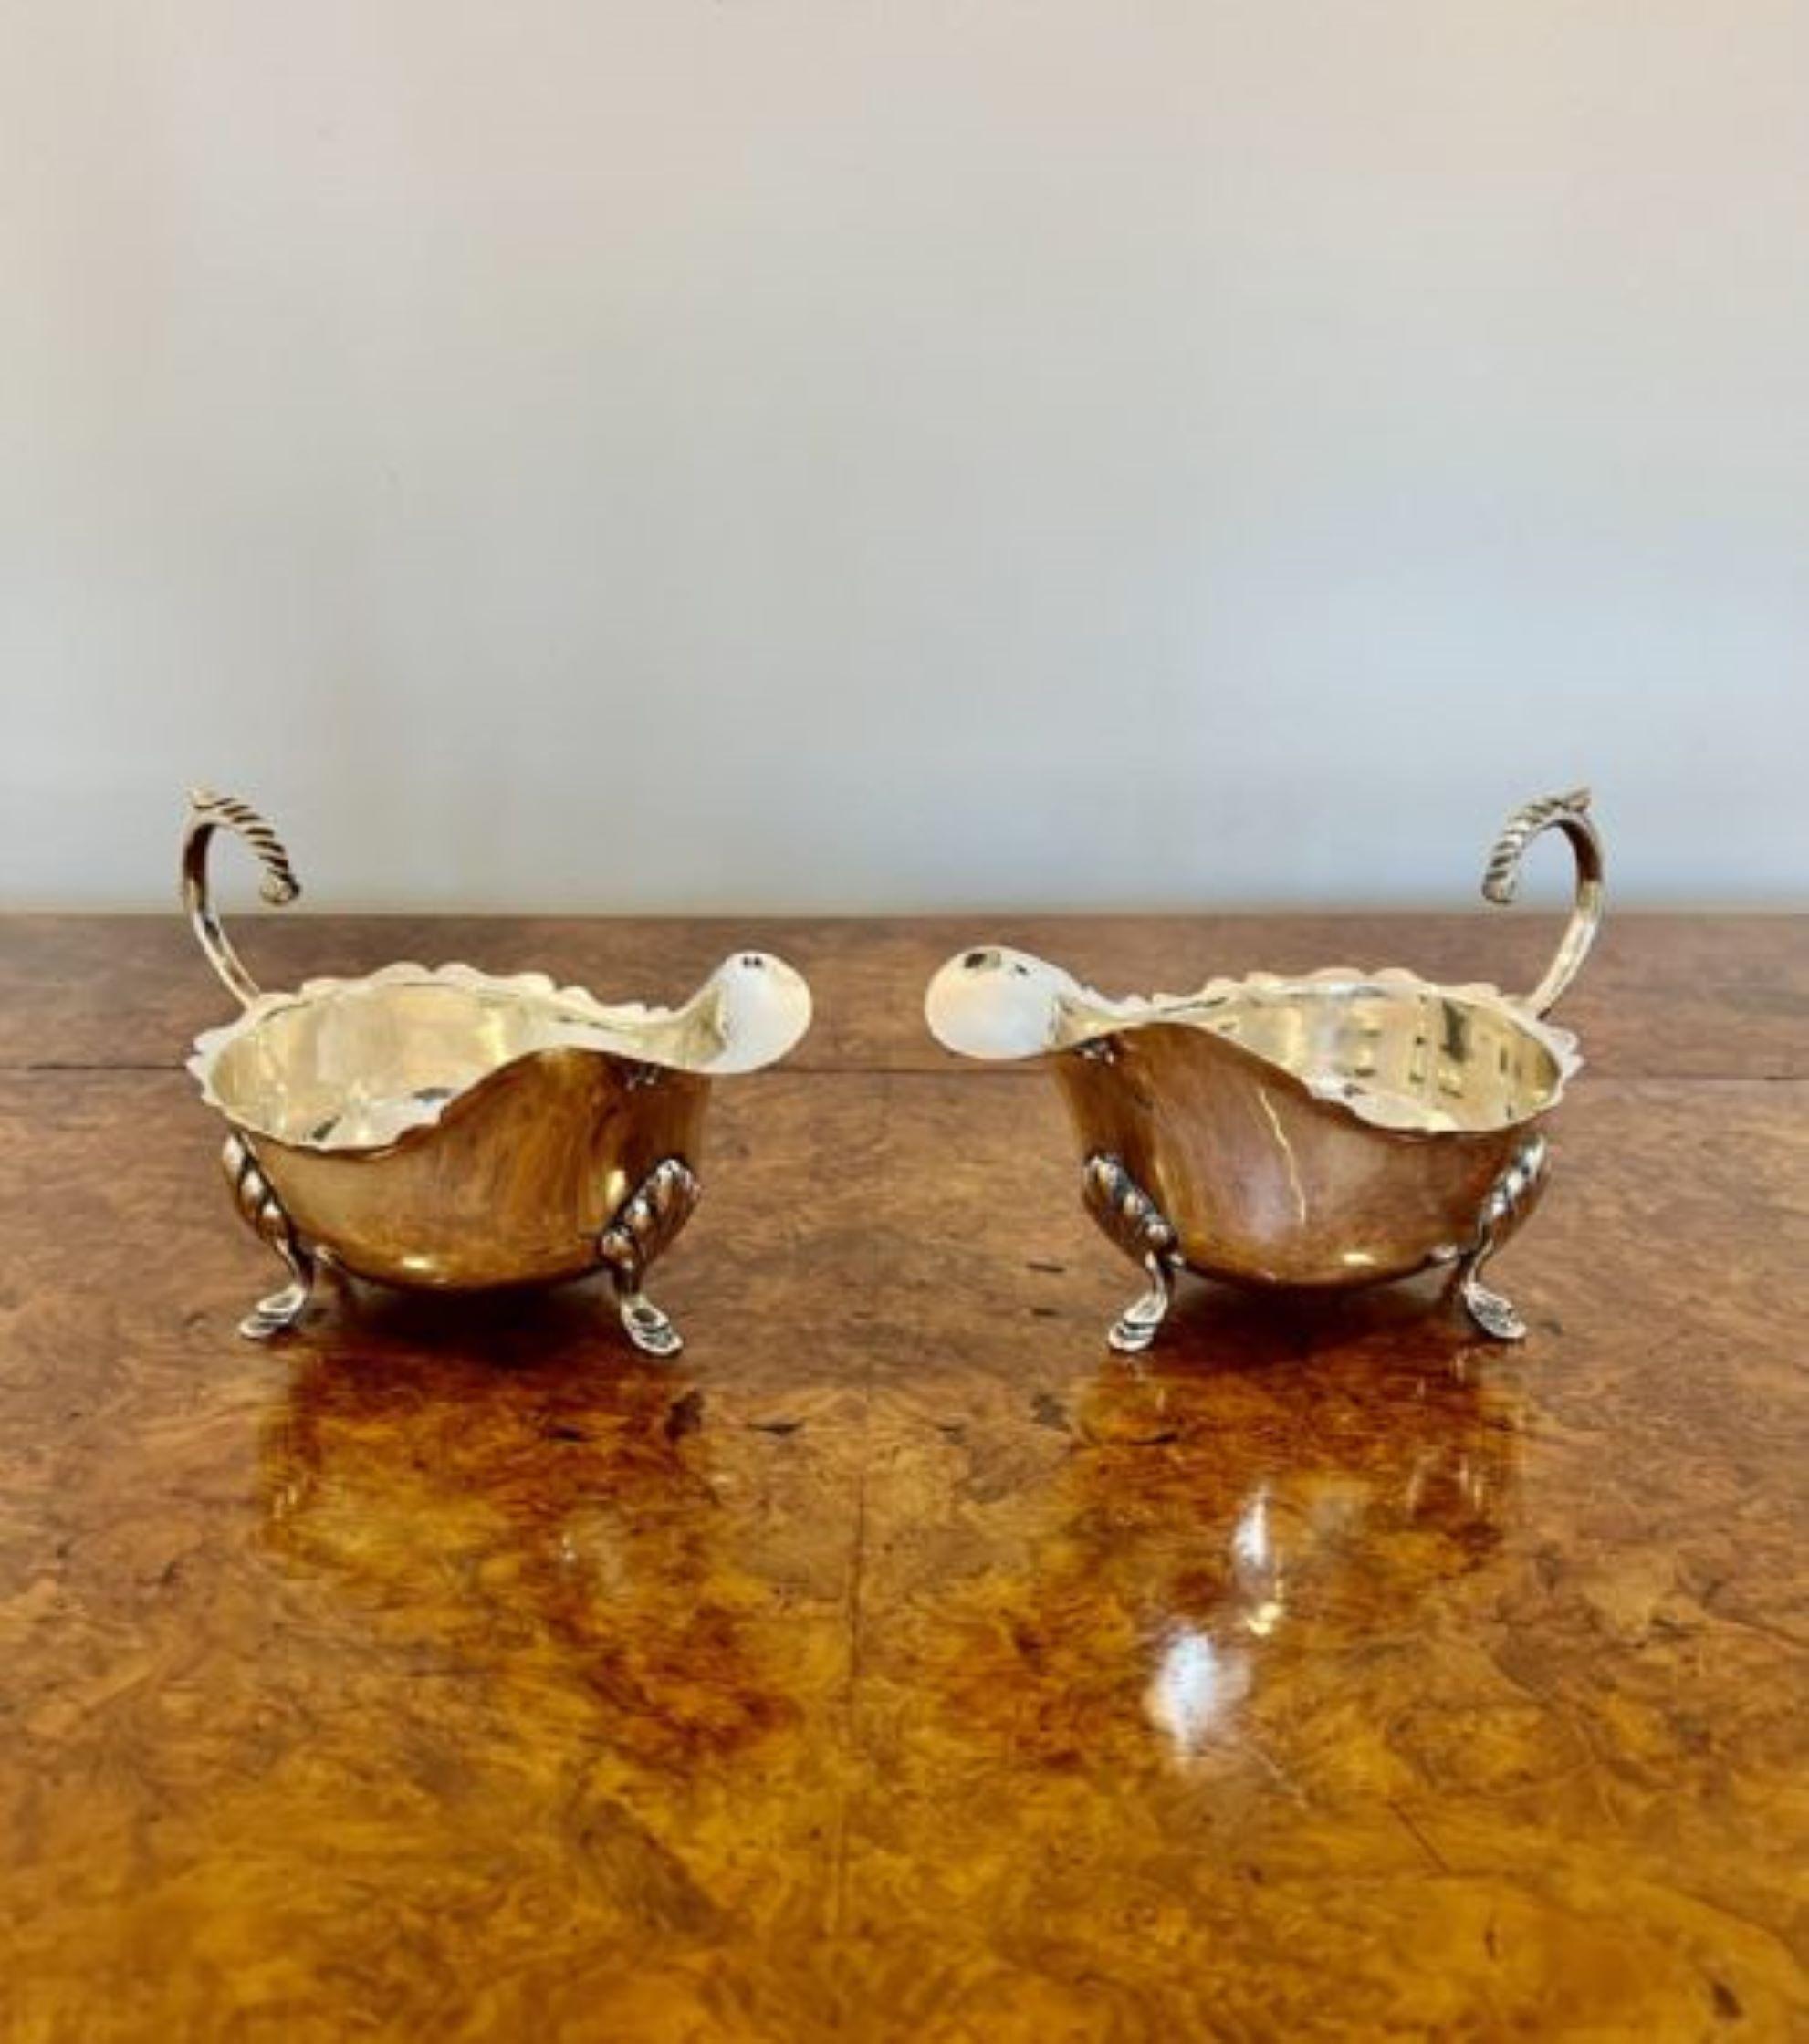 Stunning quality pair of antique Edwardian silver plated sauce boats having a stunning pair of antique Edwardian sauce boats with shaped handles to the back, shaped spout to the front, a wavy edge with a nice shaped body standing on three ornate